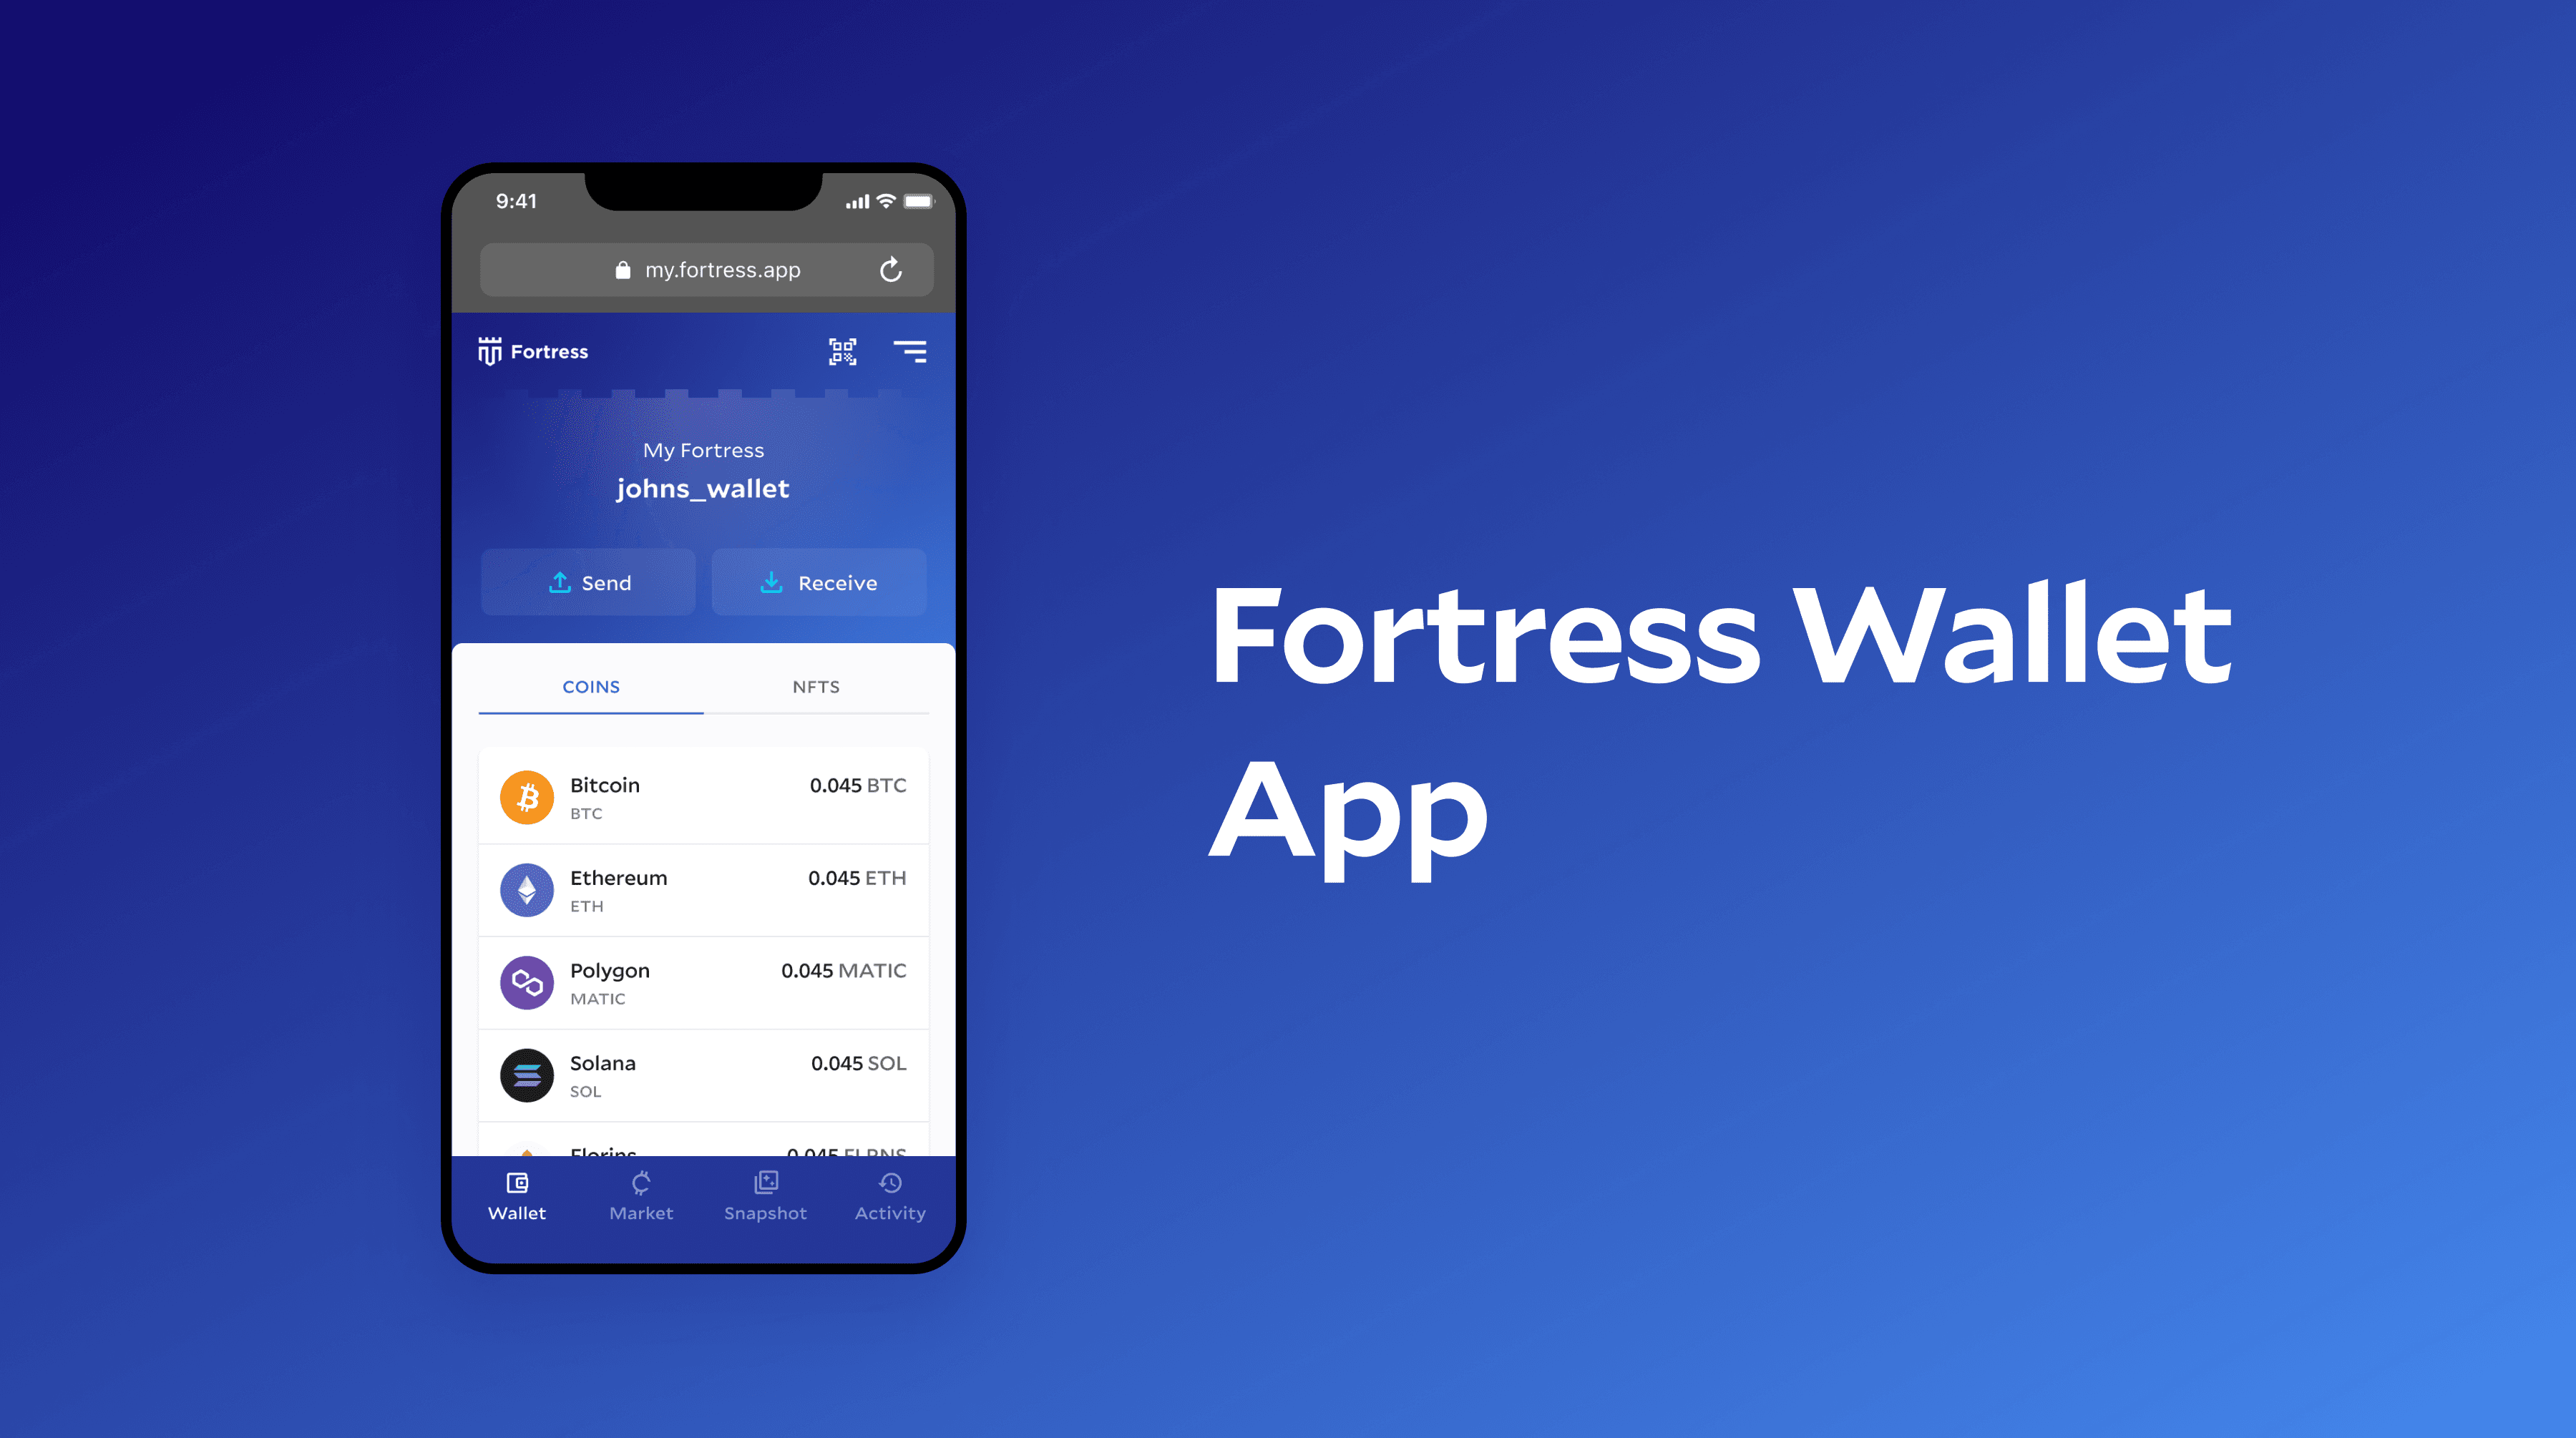 Fortress wallet